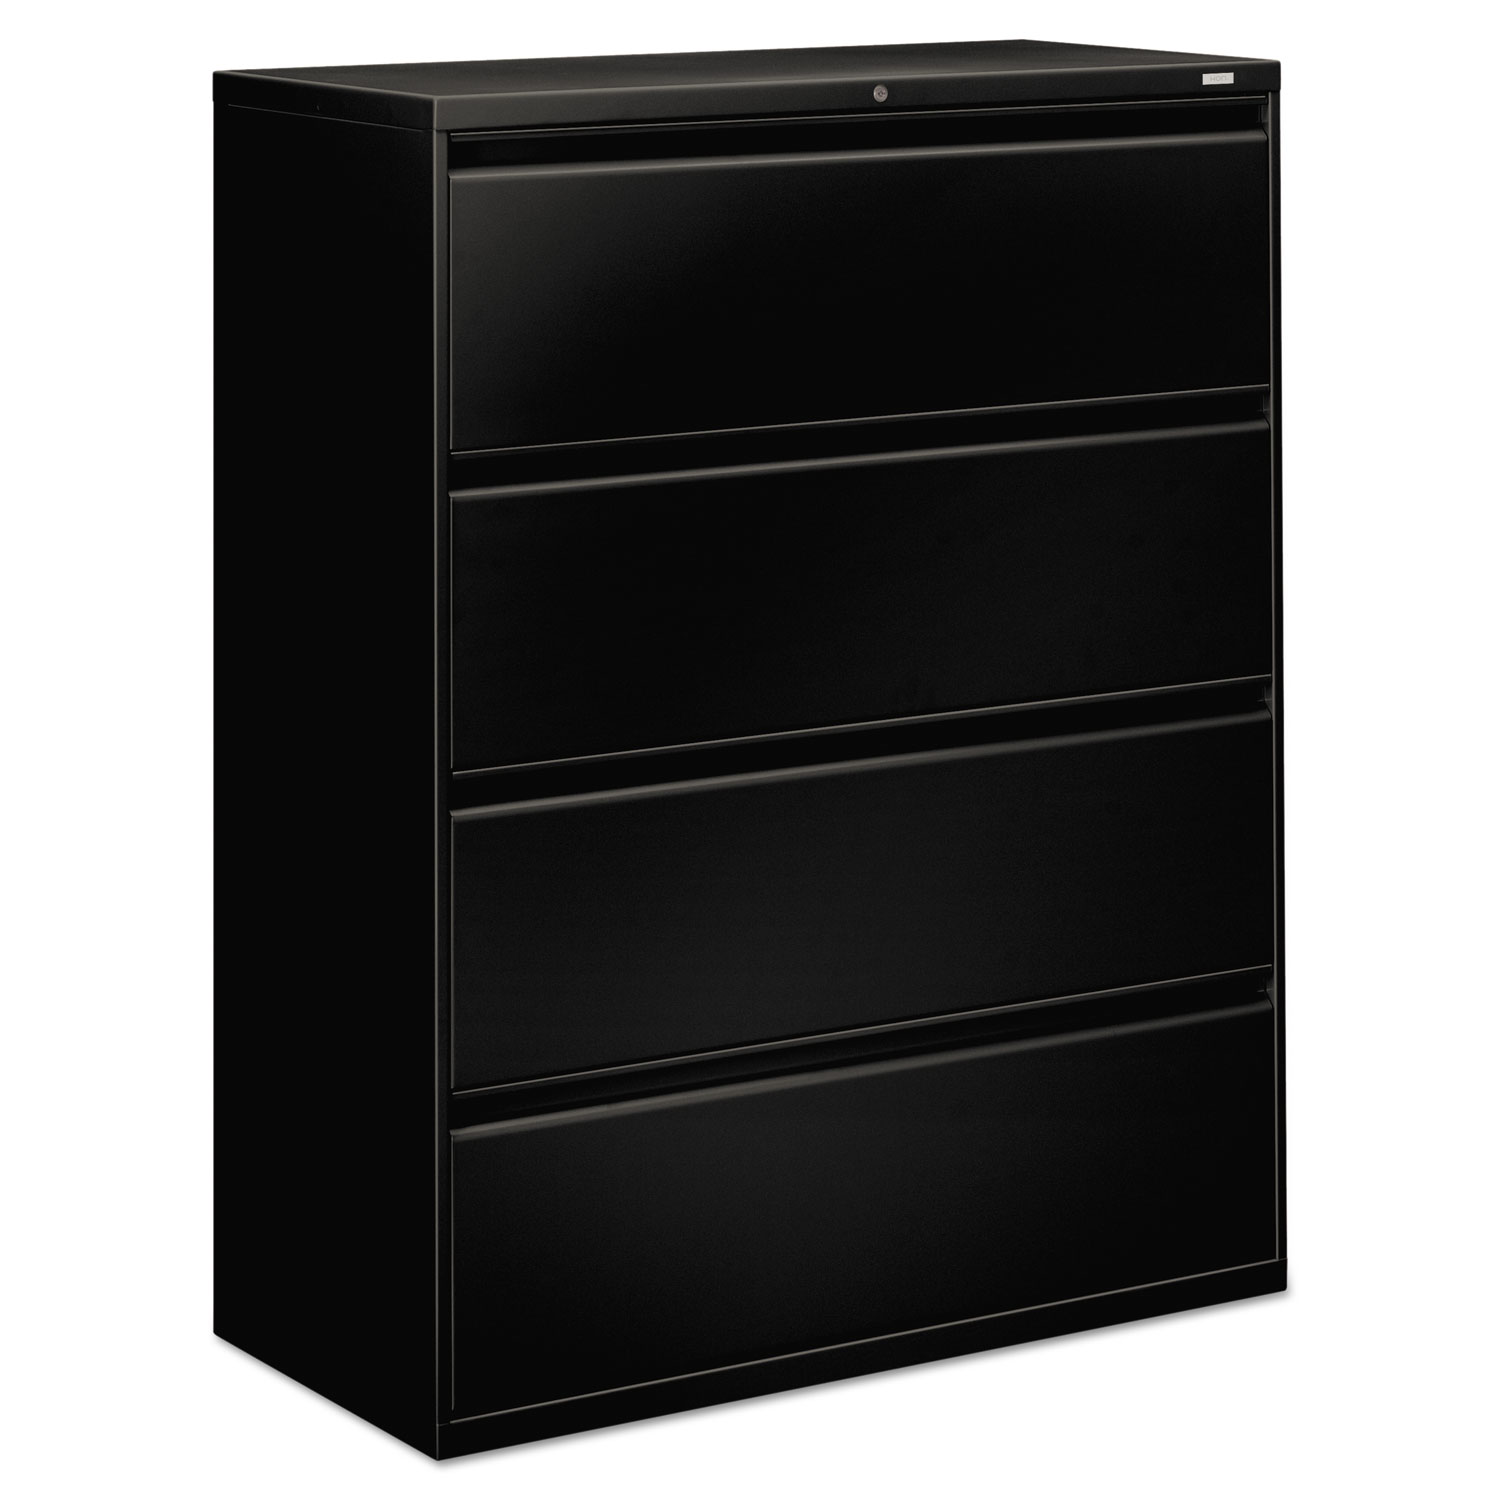 800 Series Four-Drawer Lateral File, 42w x 19-1/4d x 53-1/4h, Black